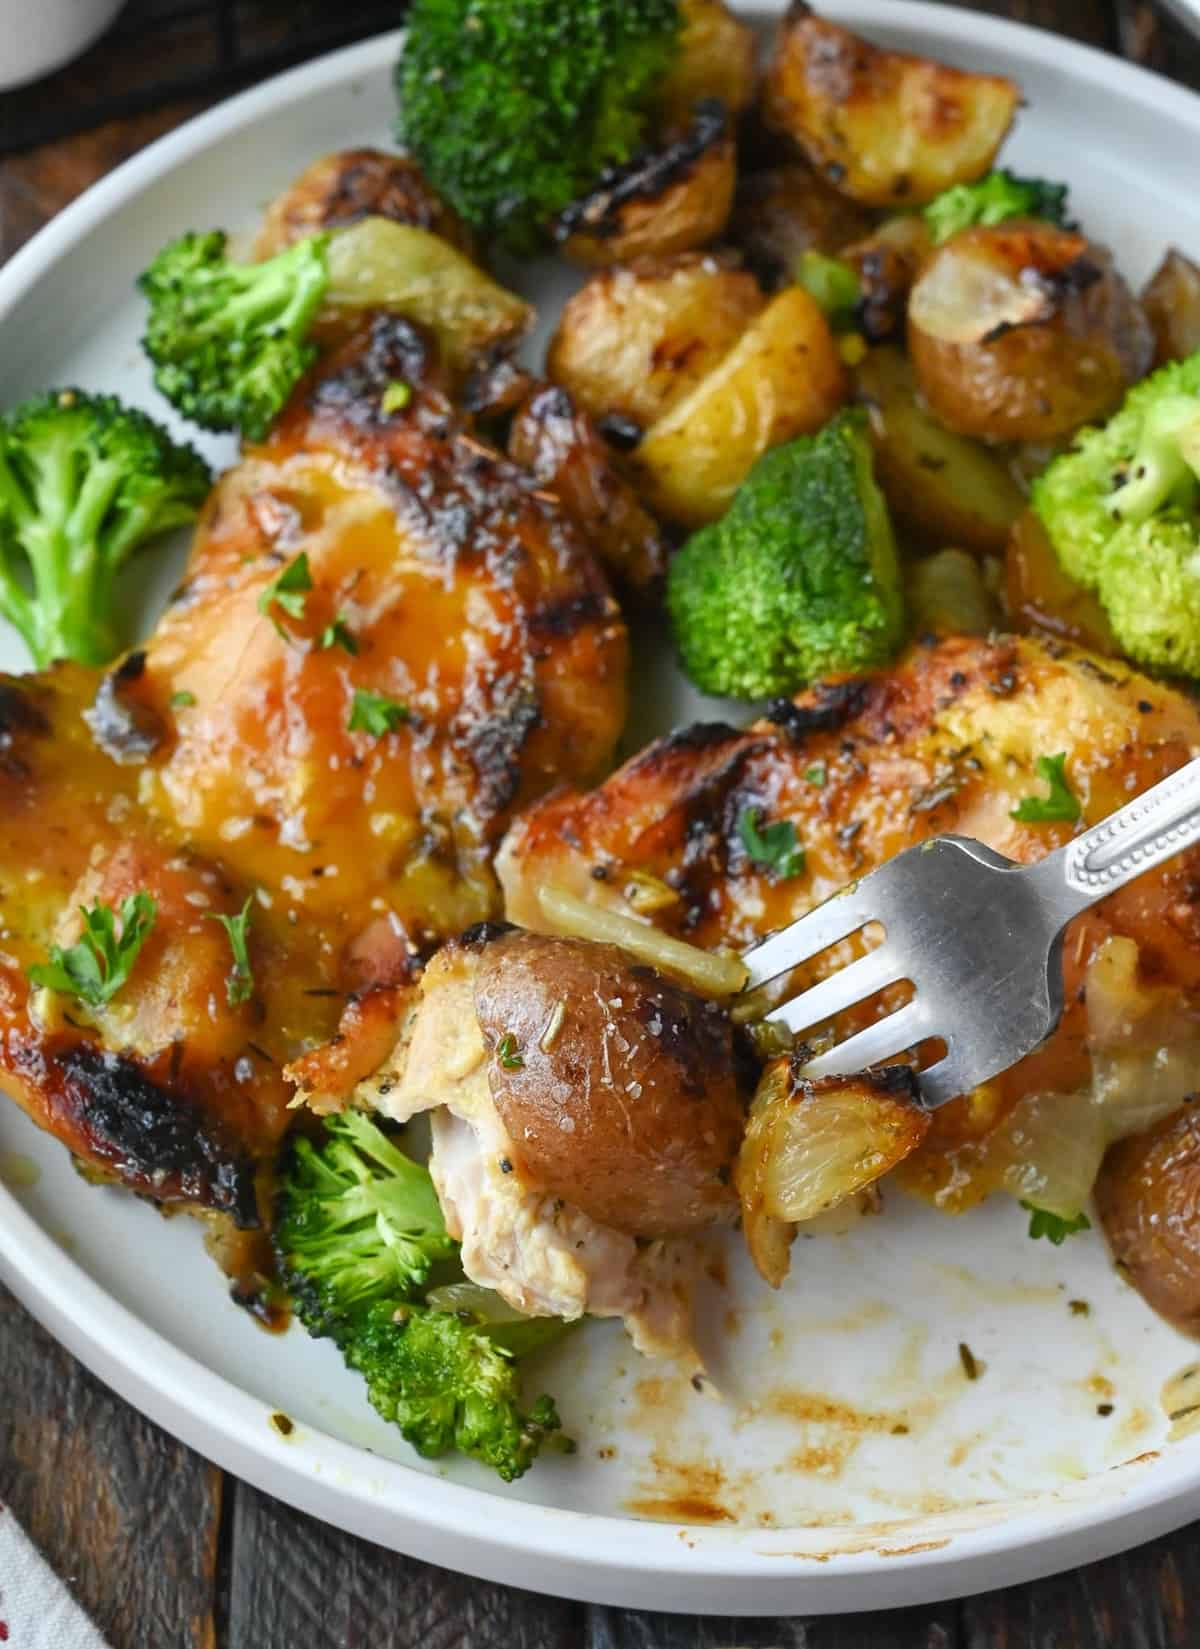 A fork taking a bite of chicken and broccoli.